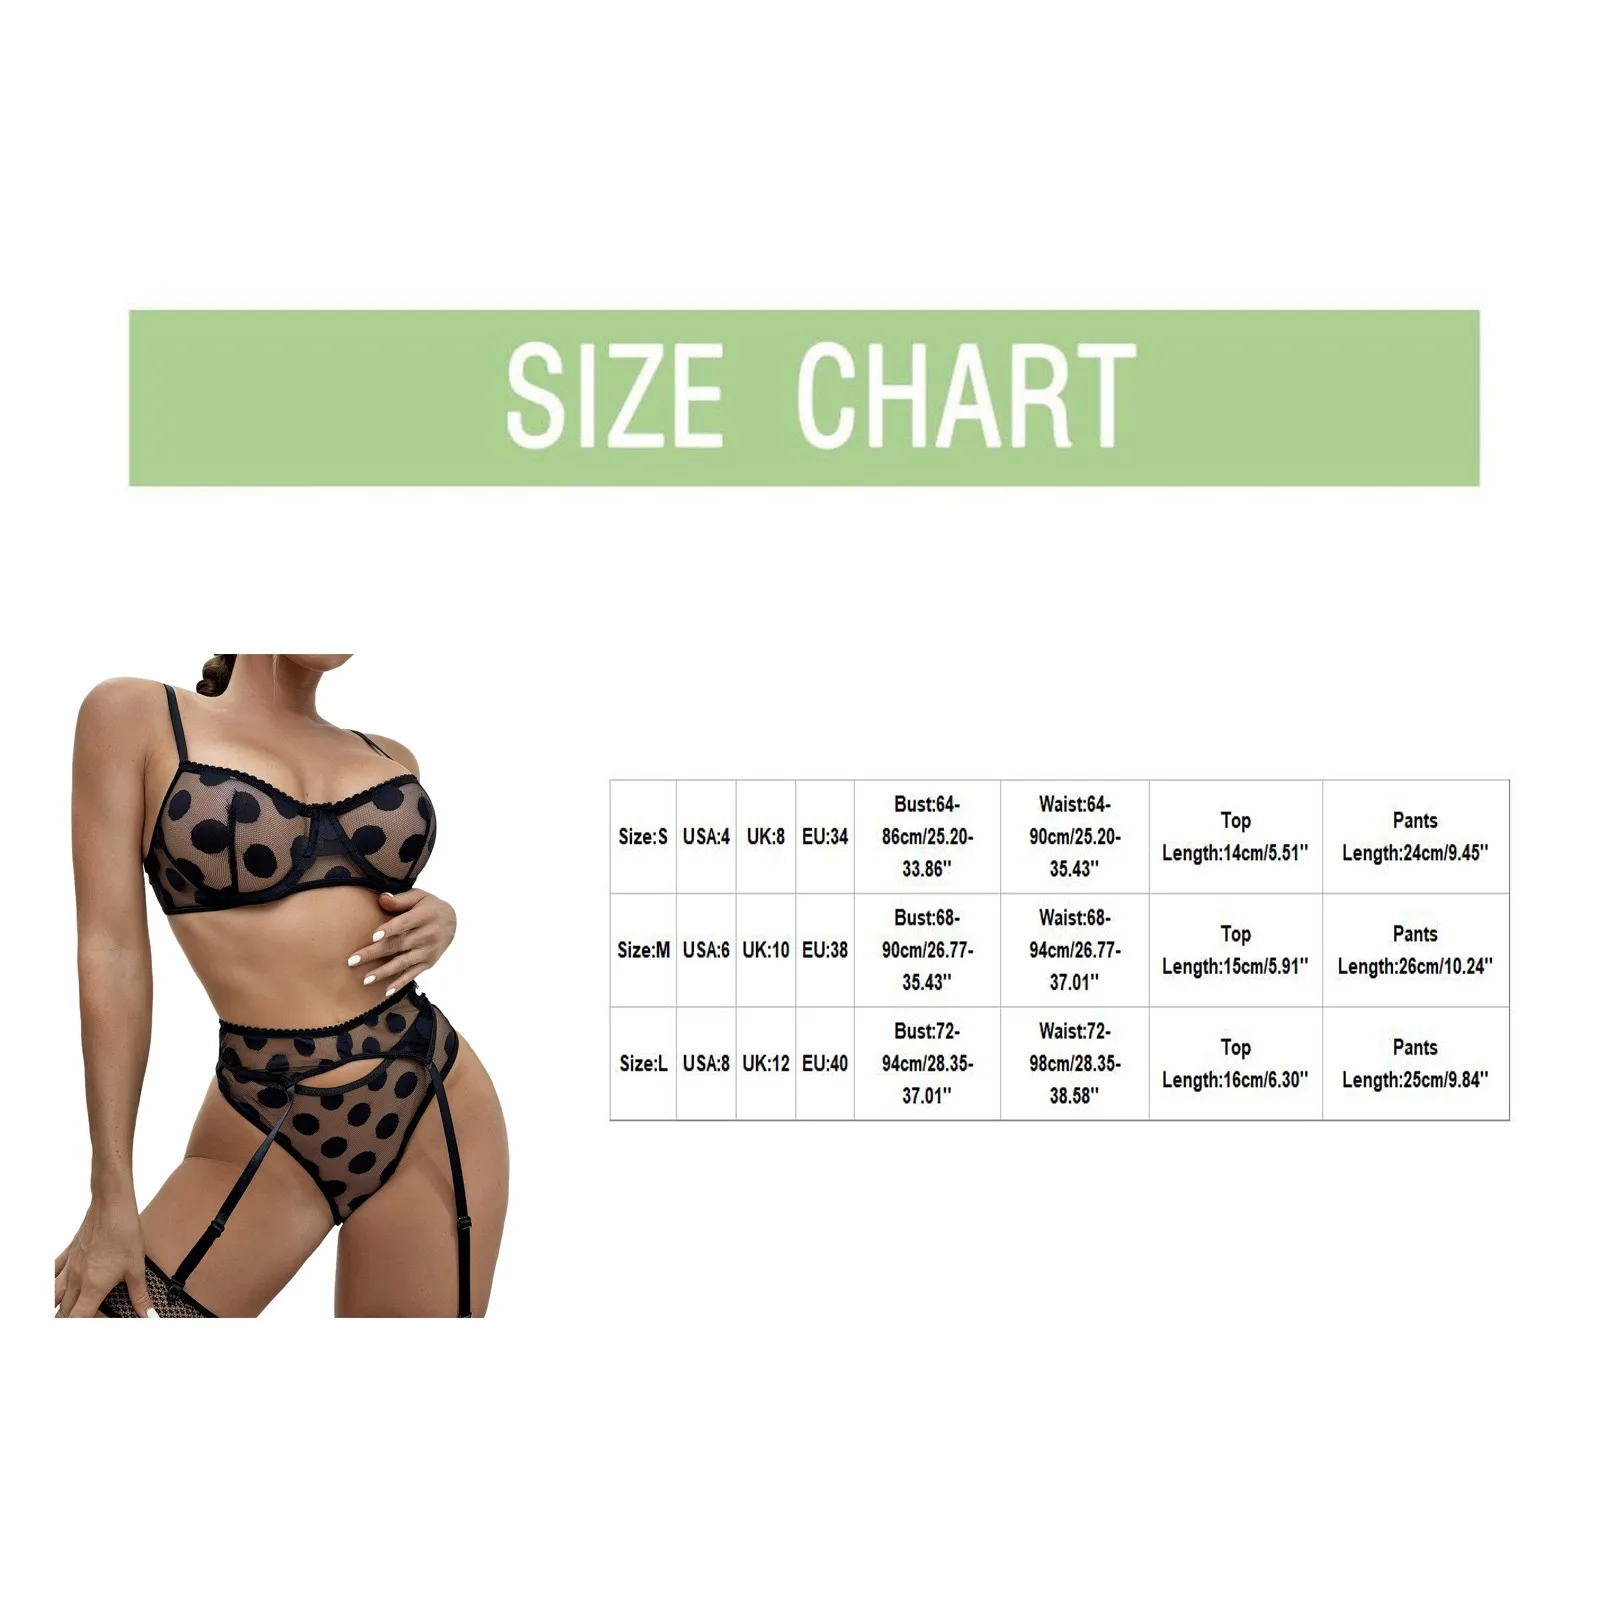 Embroidery Sexy Hot Lingerie Bra Sets Woman Clothes Sexy Ladies Underwear Women's Underwear Set Sensual Erotic Exotic Intimates plus size bra and panty sets